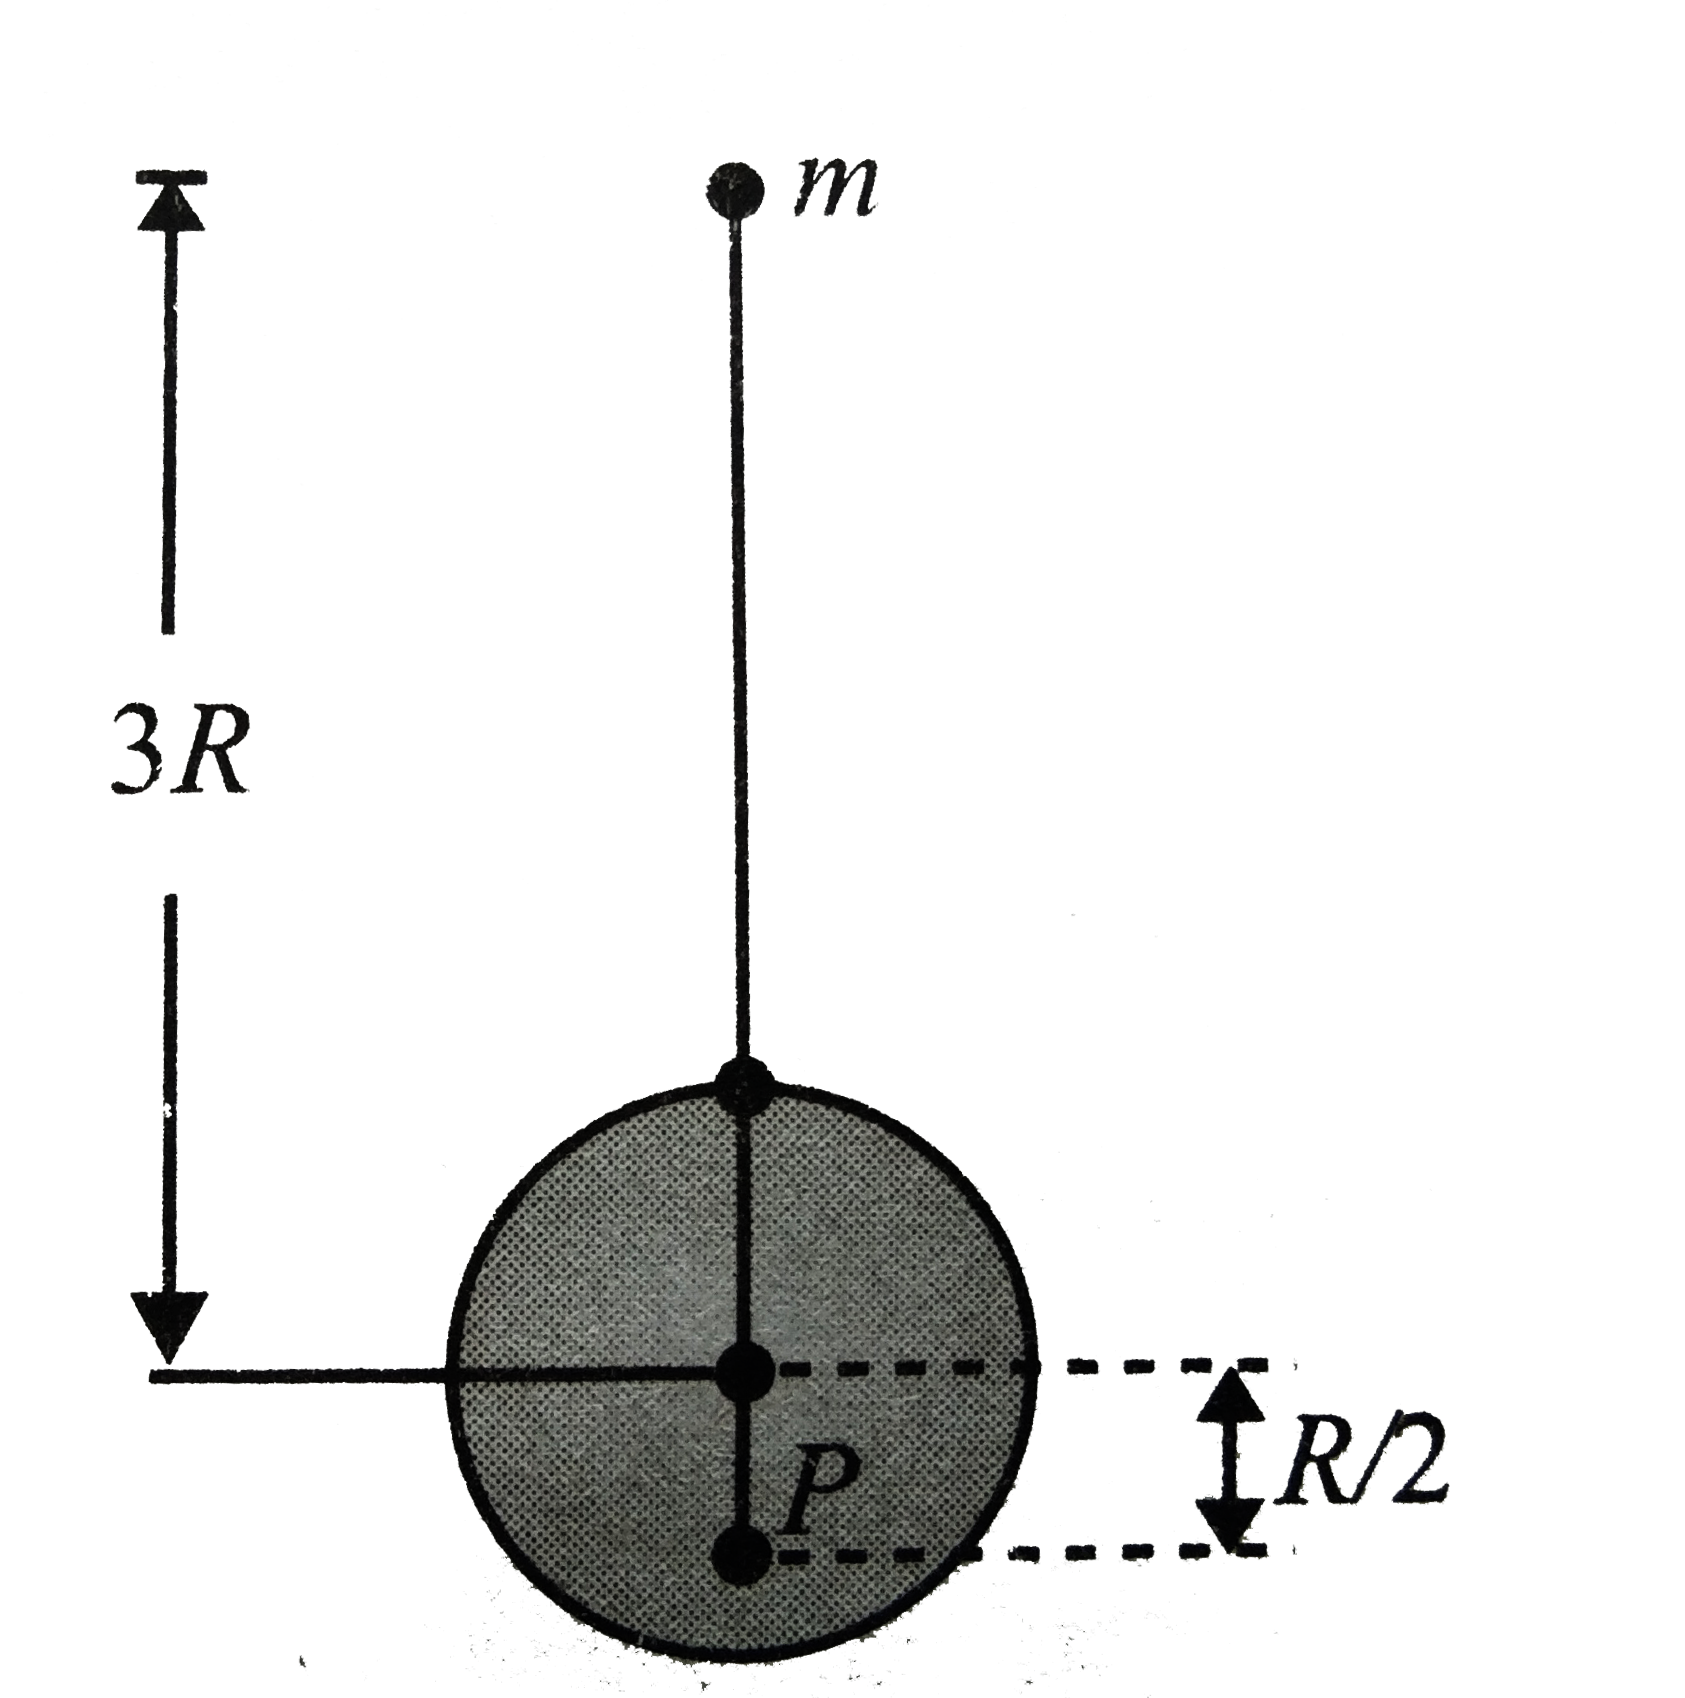 A point mass m is released from rest at a distance of 3R from the centre of a thin-walled hollow sphere of radius R and mass M as shown. The hollow sphere is fixed in position and the only force on the point mass is the gravitational attraction of the hollow sphere. There is a very small hole in the hollow sphere through which the point mass falls as shown. The velocity of a point mass when it passes through point P at a distance R//2 from the centre of the sphere is